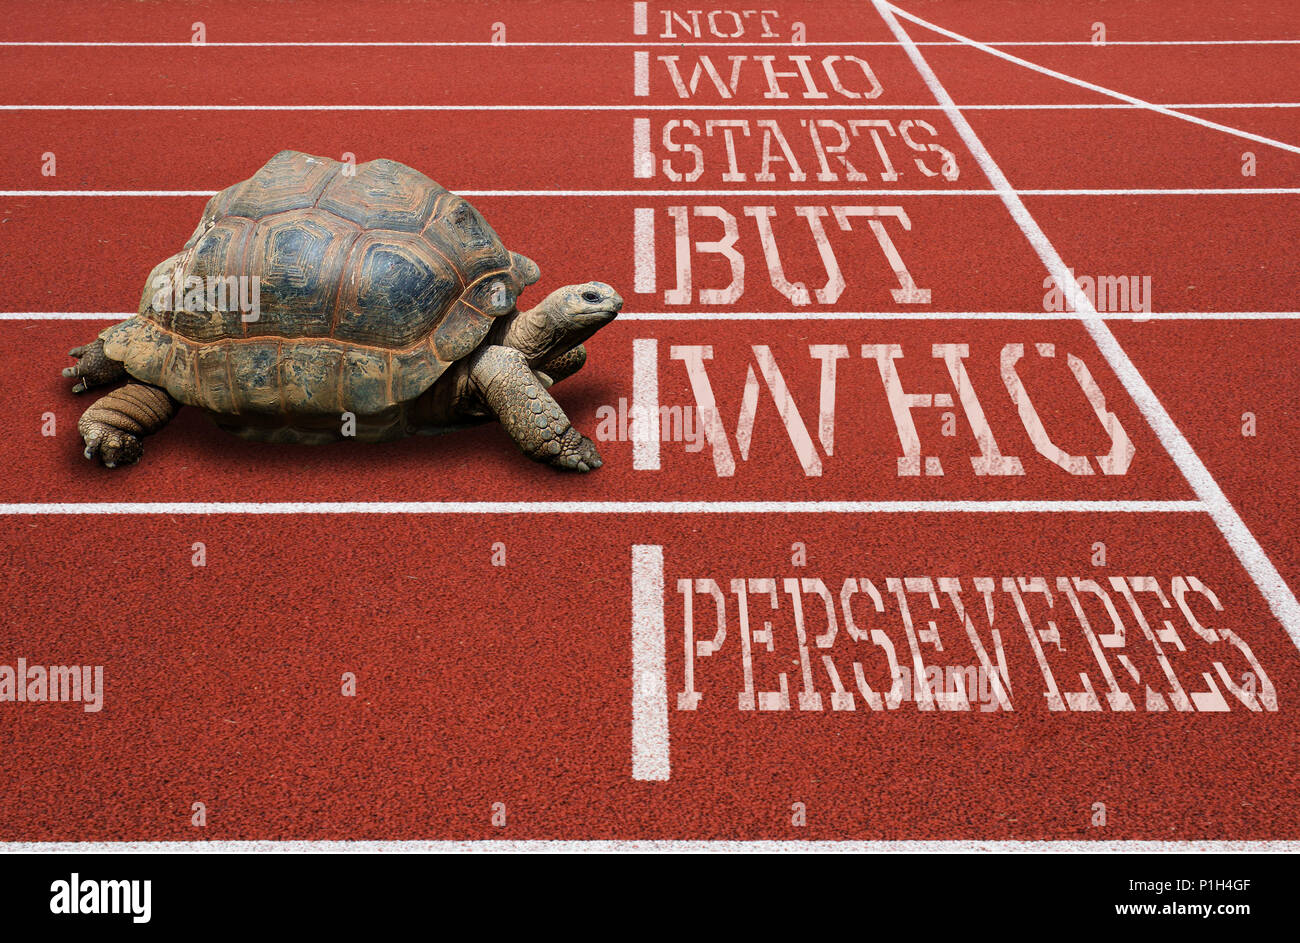 Turtle Running Athletic Track Motivational Quote Stock Photo